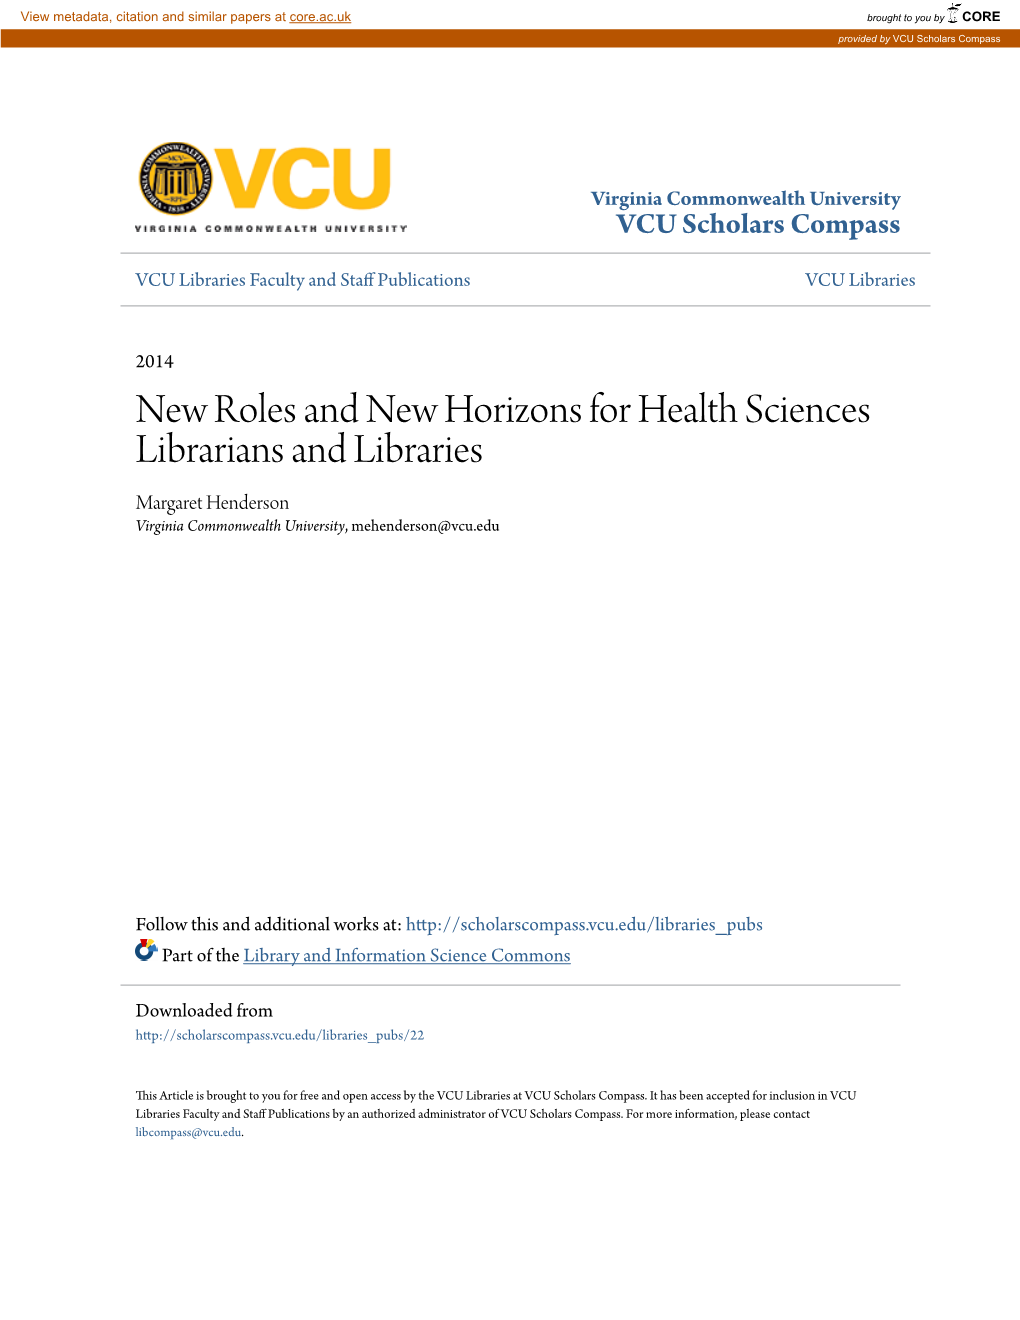 New Roles and New Horizons for Health Sciences Librarians and Libraries Margaret Henderson Virginia Commonwealth University, Mehenderson@Vcu.Edu